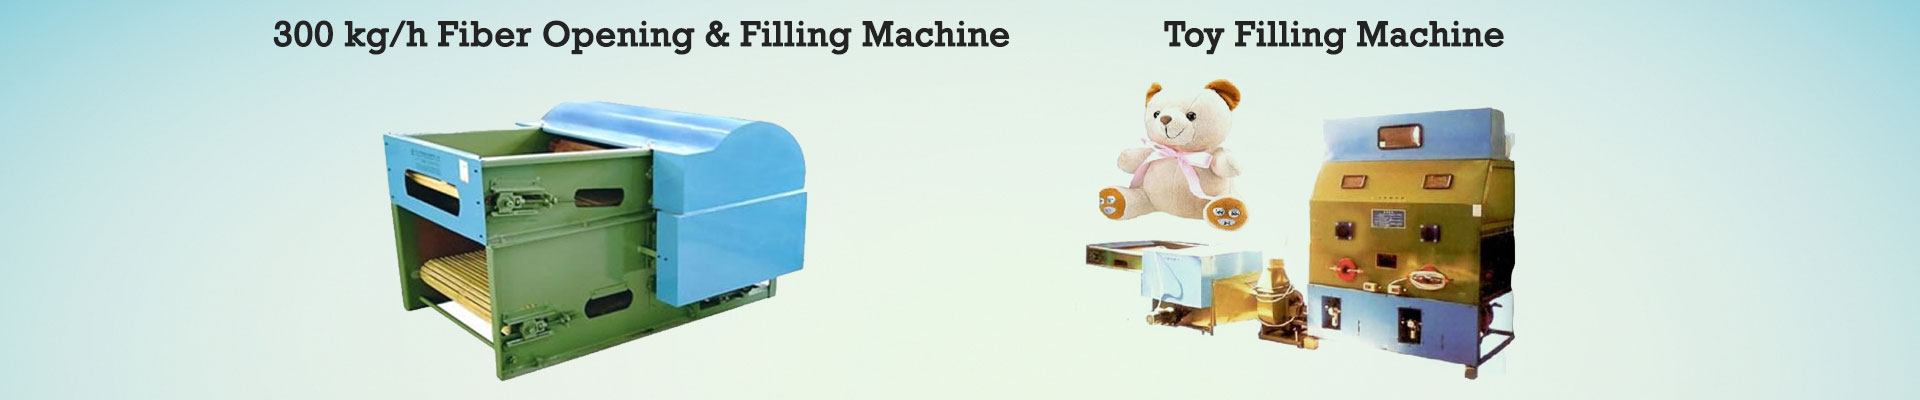 Fiber Opening and Filling Machine